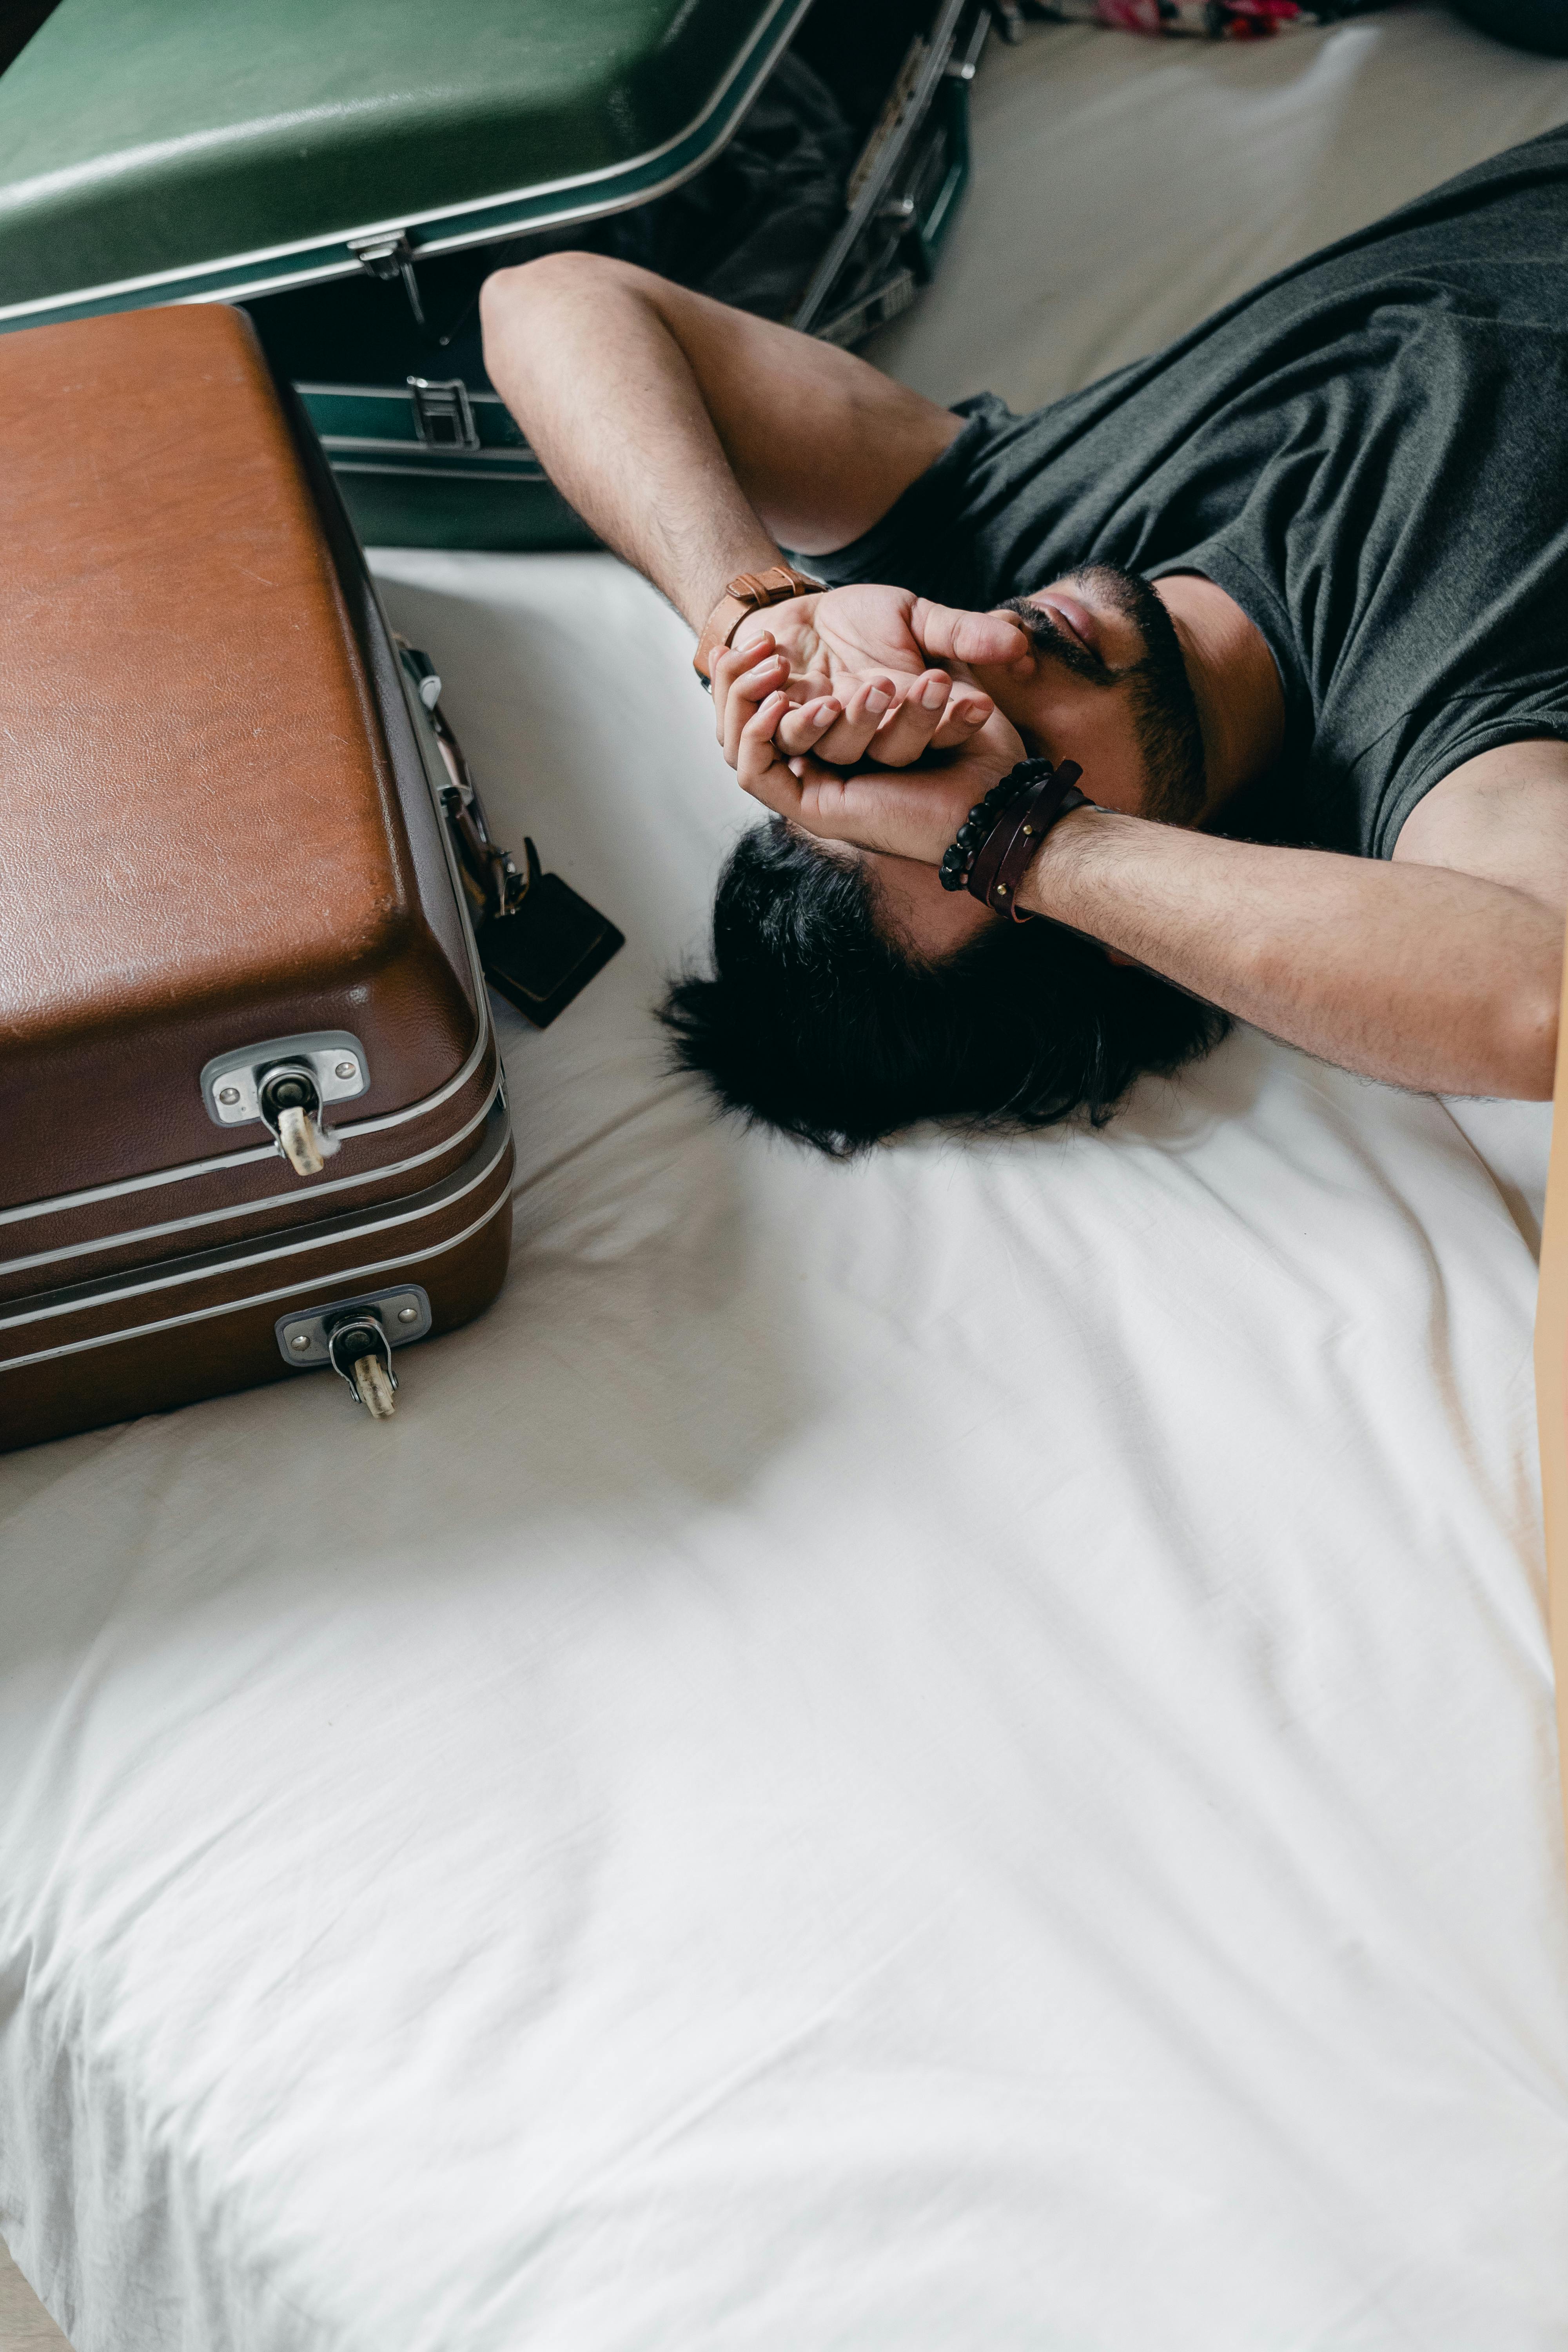 A man taking a break from packing his suitcase | Source: Pexels